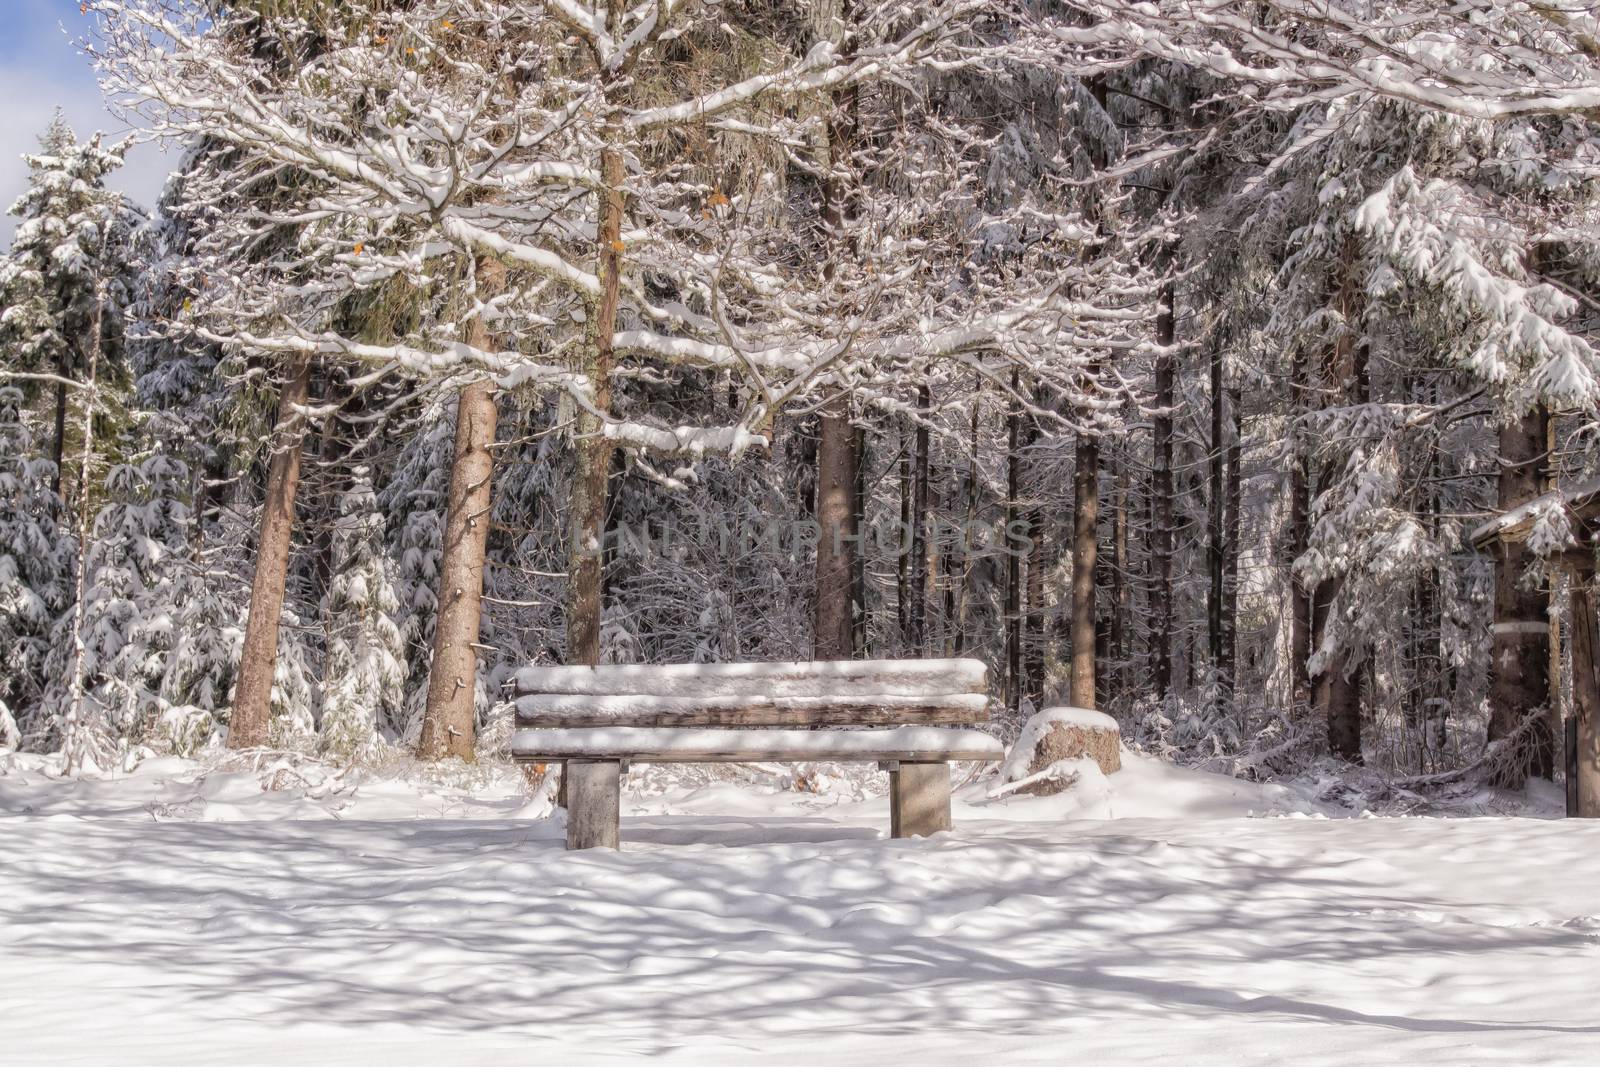 Wooden bench in a winter landscape